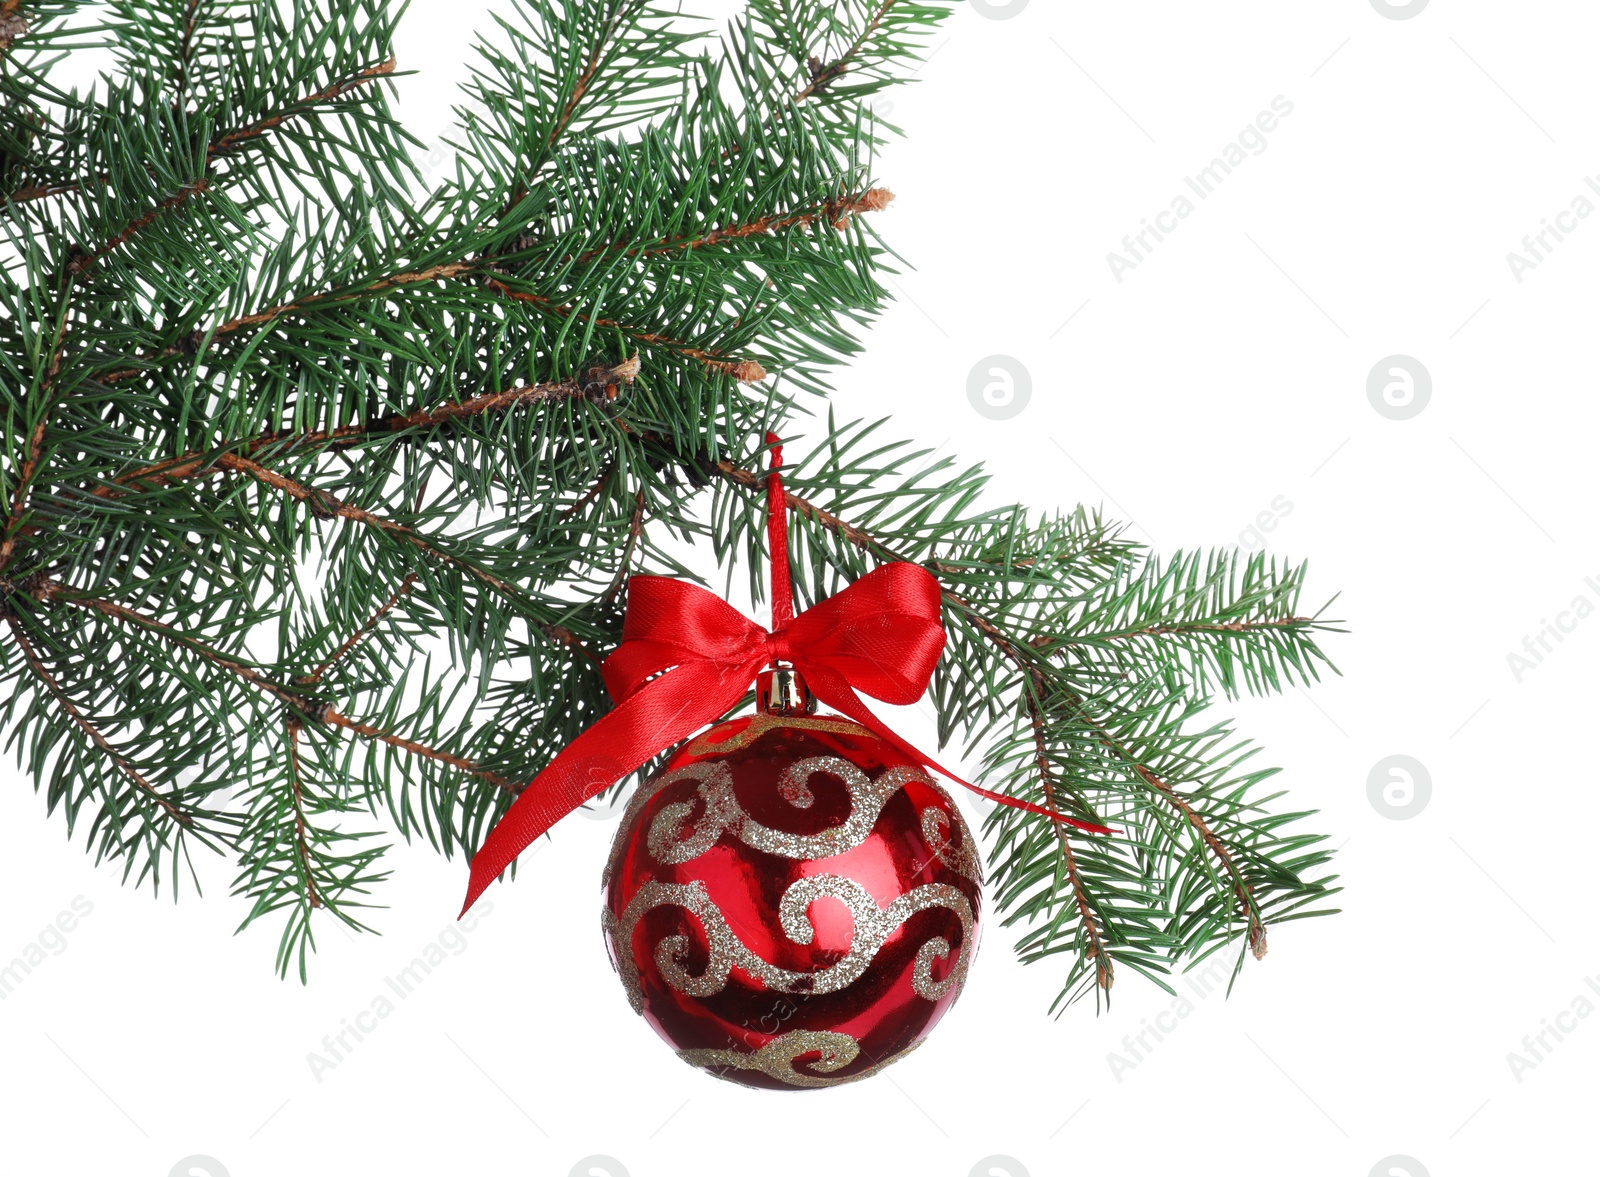 Photo of Red shiny Christmas ball on fir tree branch against white background